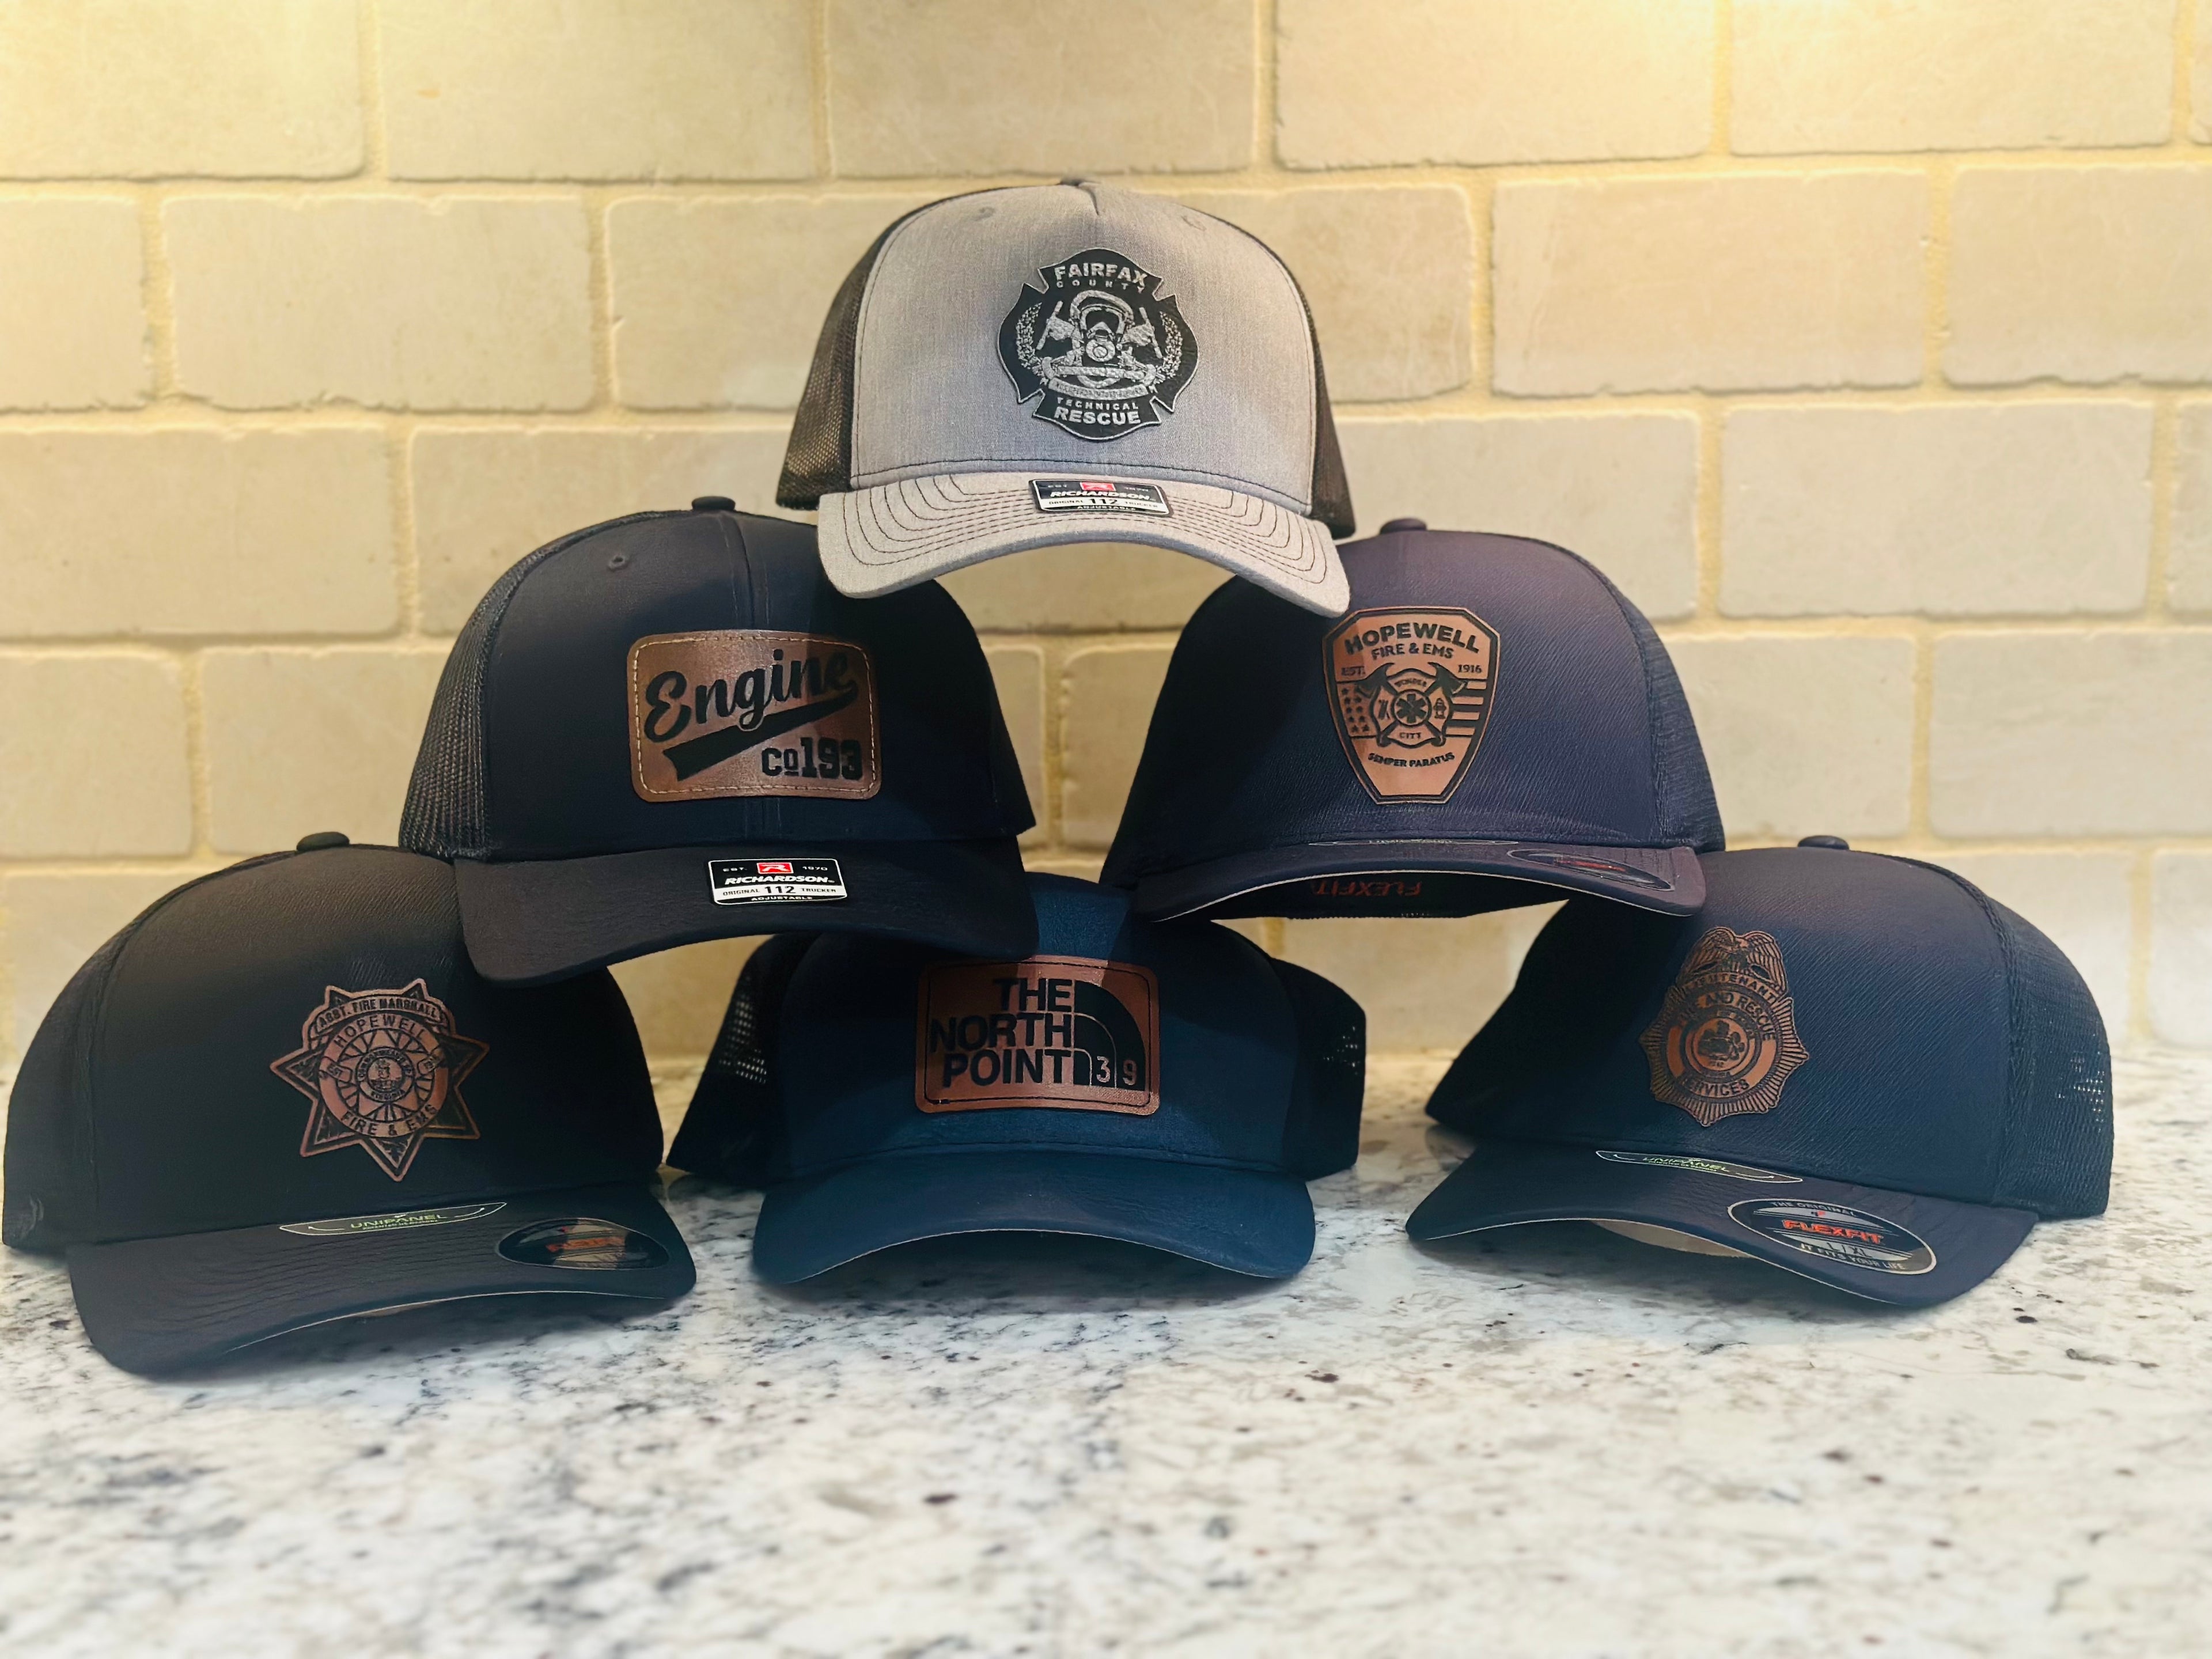 Union Local Number Hat Custom Leather Patch Hats